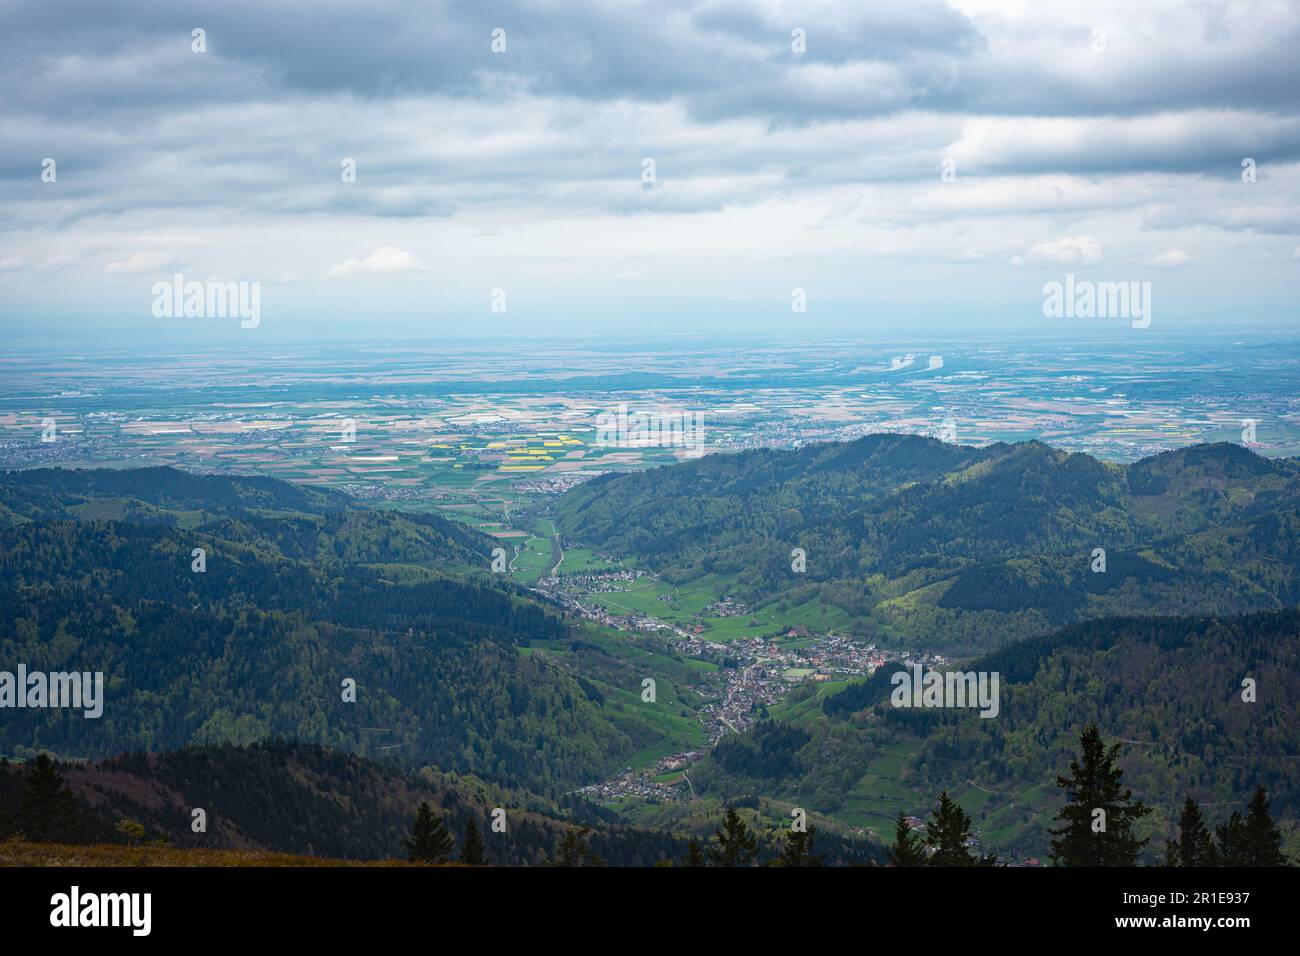 View of part of the Black Forest and Rhine Valley near the border of Germany and France from Mount Belchen, Germany Stock Photo